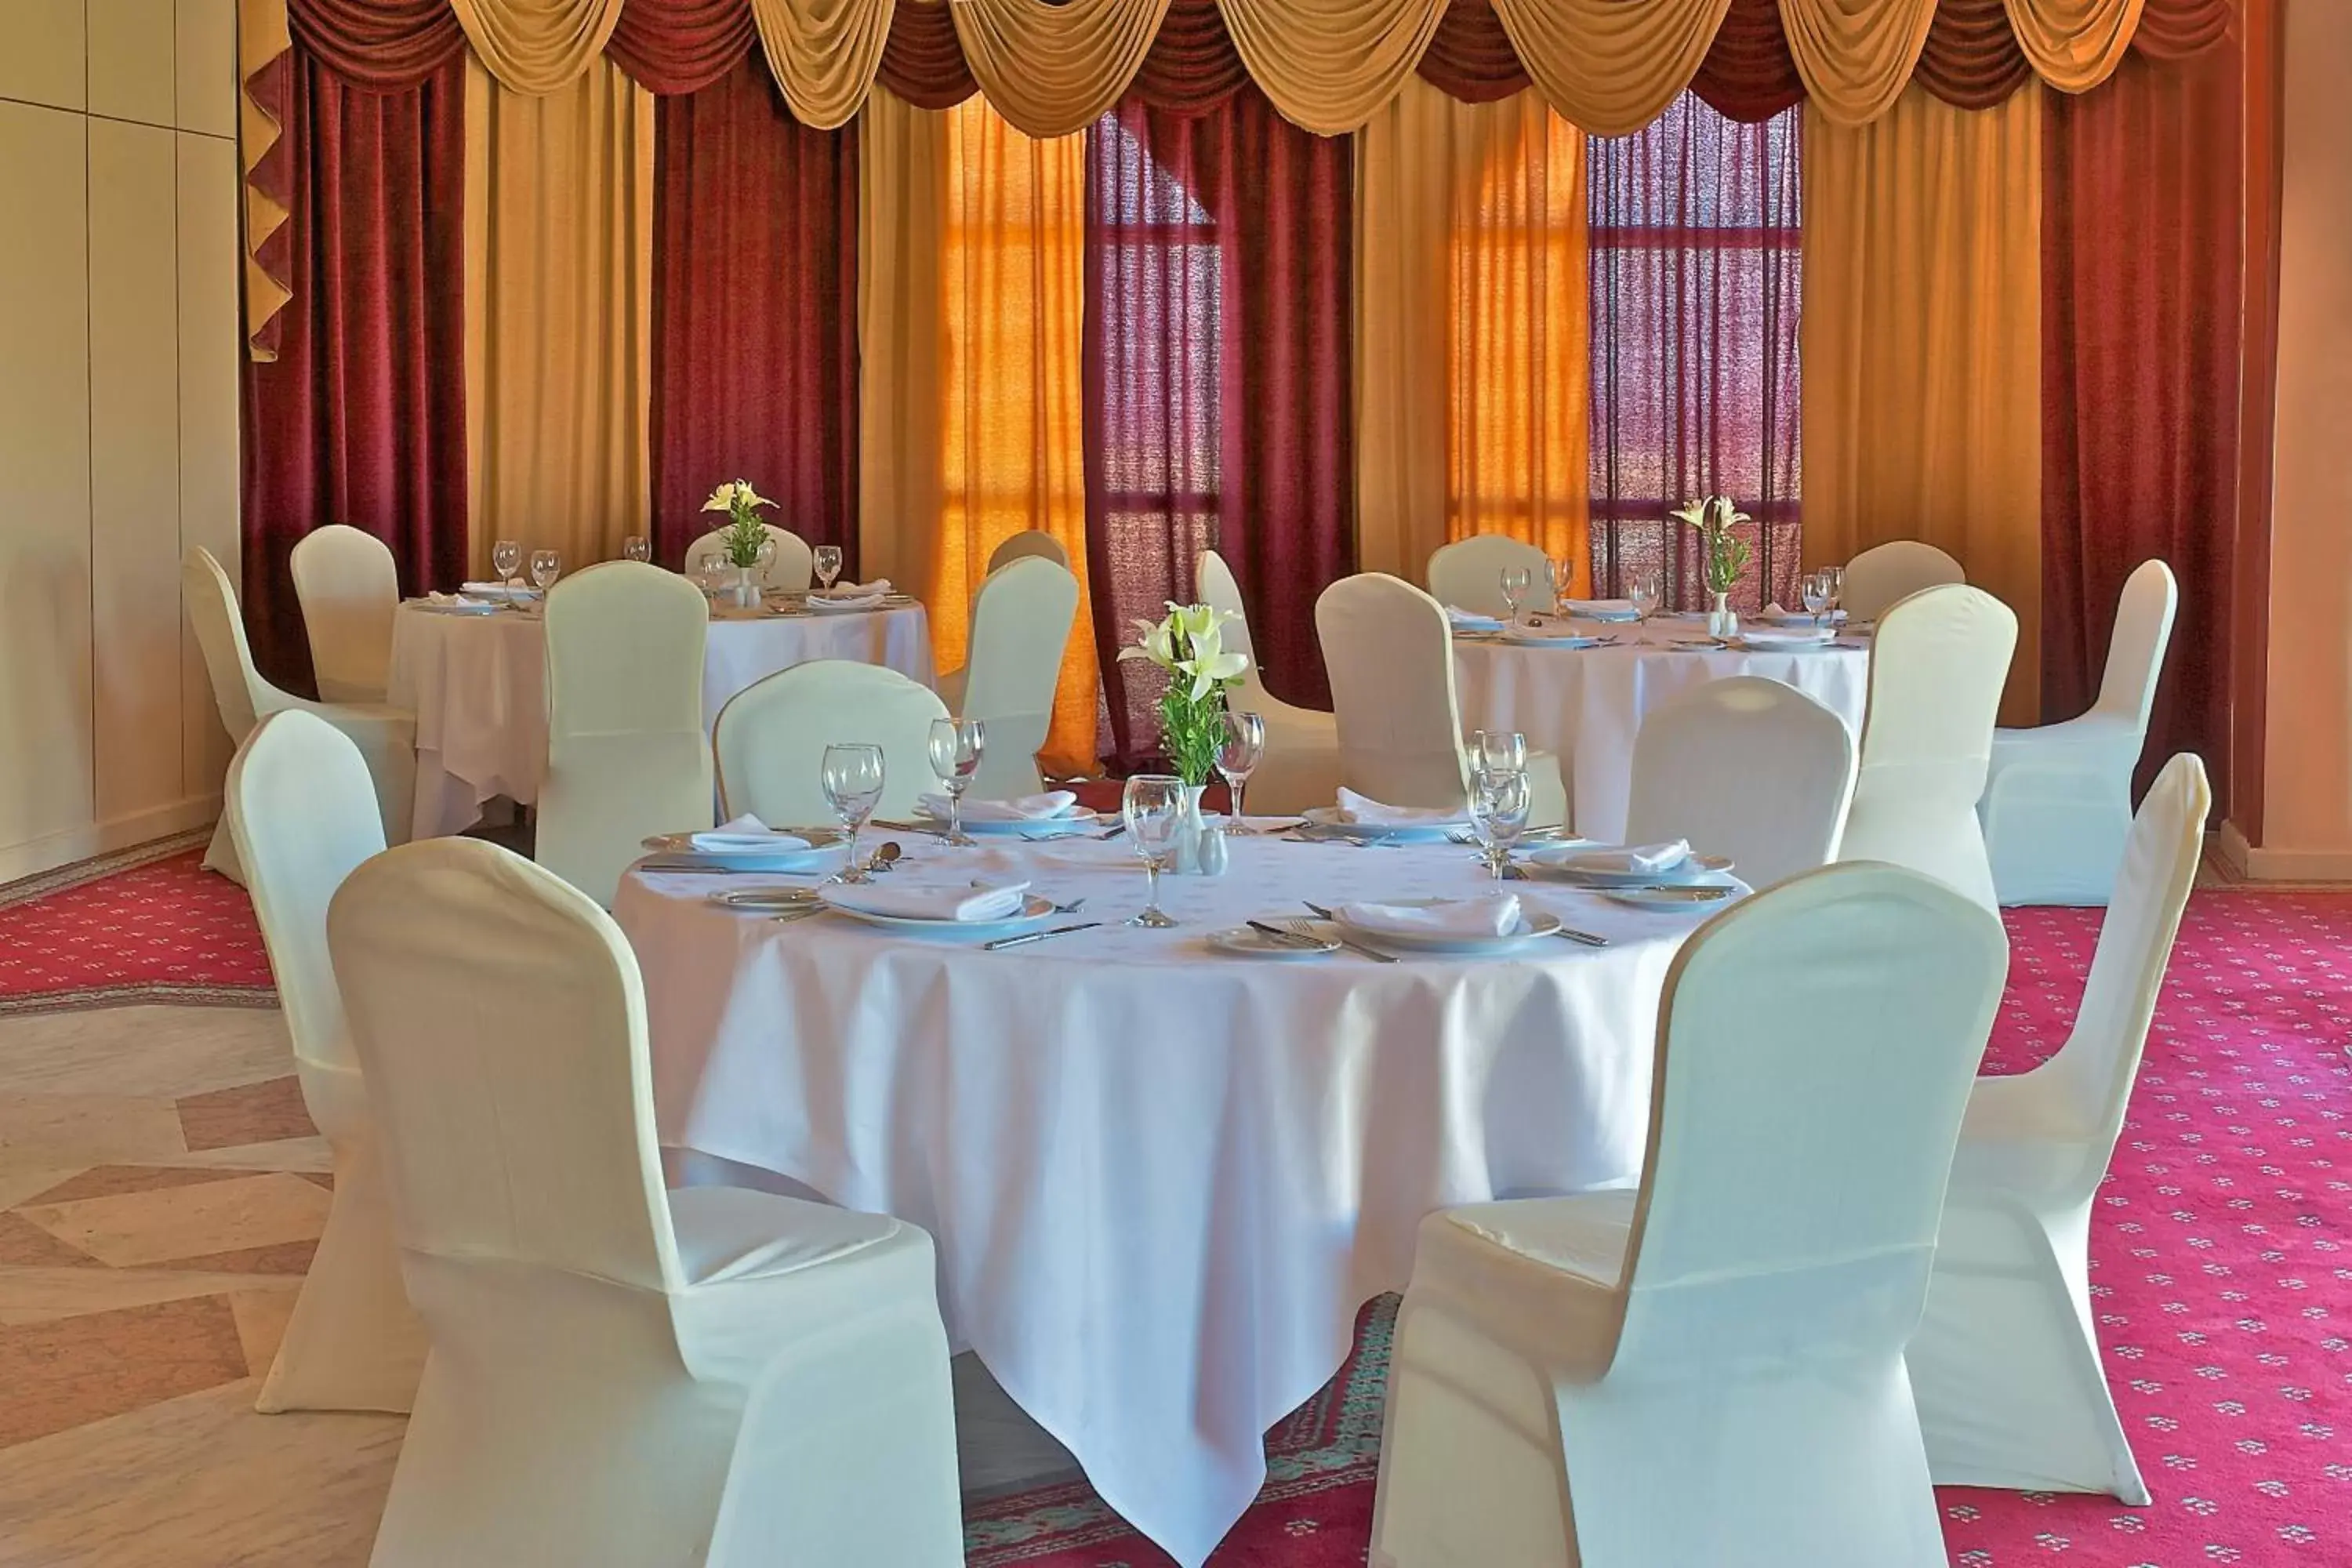 Meeting/conference room, Banquet Facilities in Sheraton Montazah Hotel